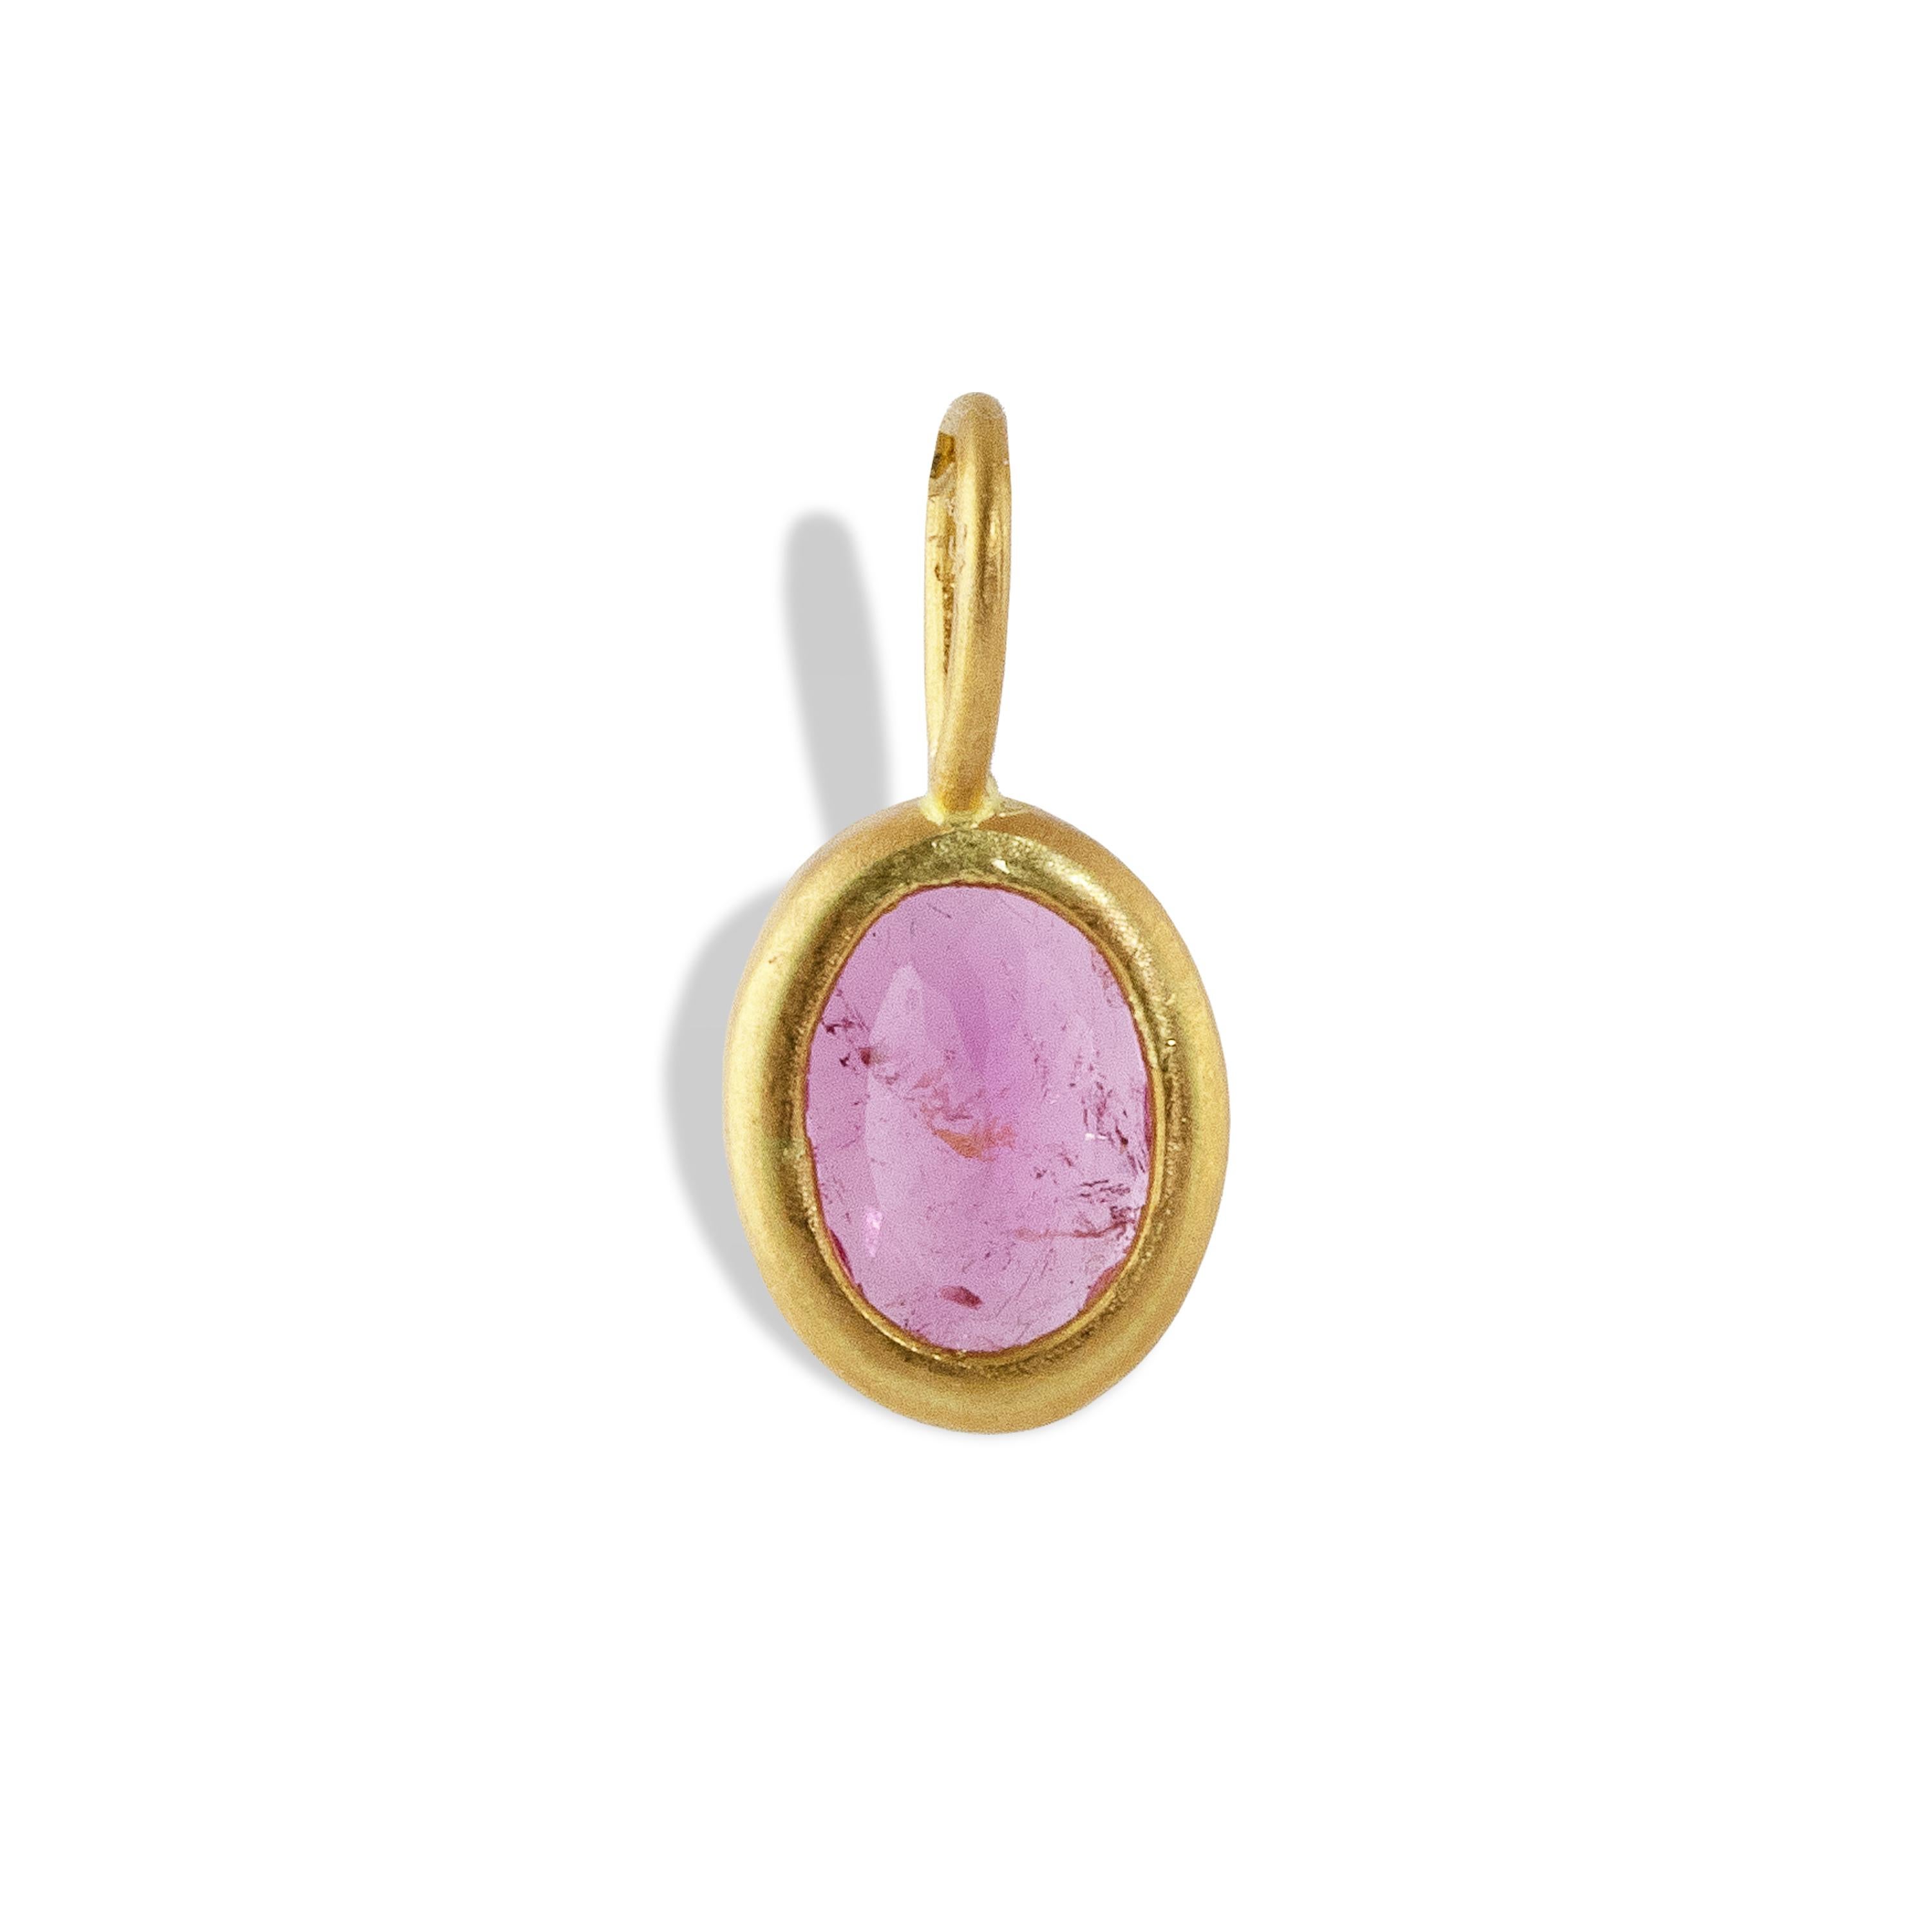 Contemporary Ico & the Bird Fine Jewelry Pink Tourmaline 22k Gold Oval Pendant For Sale